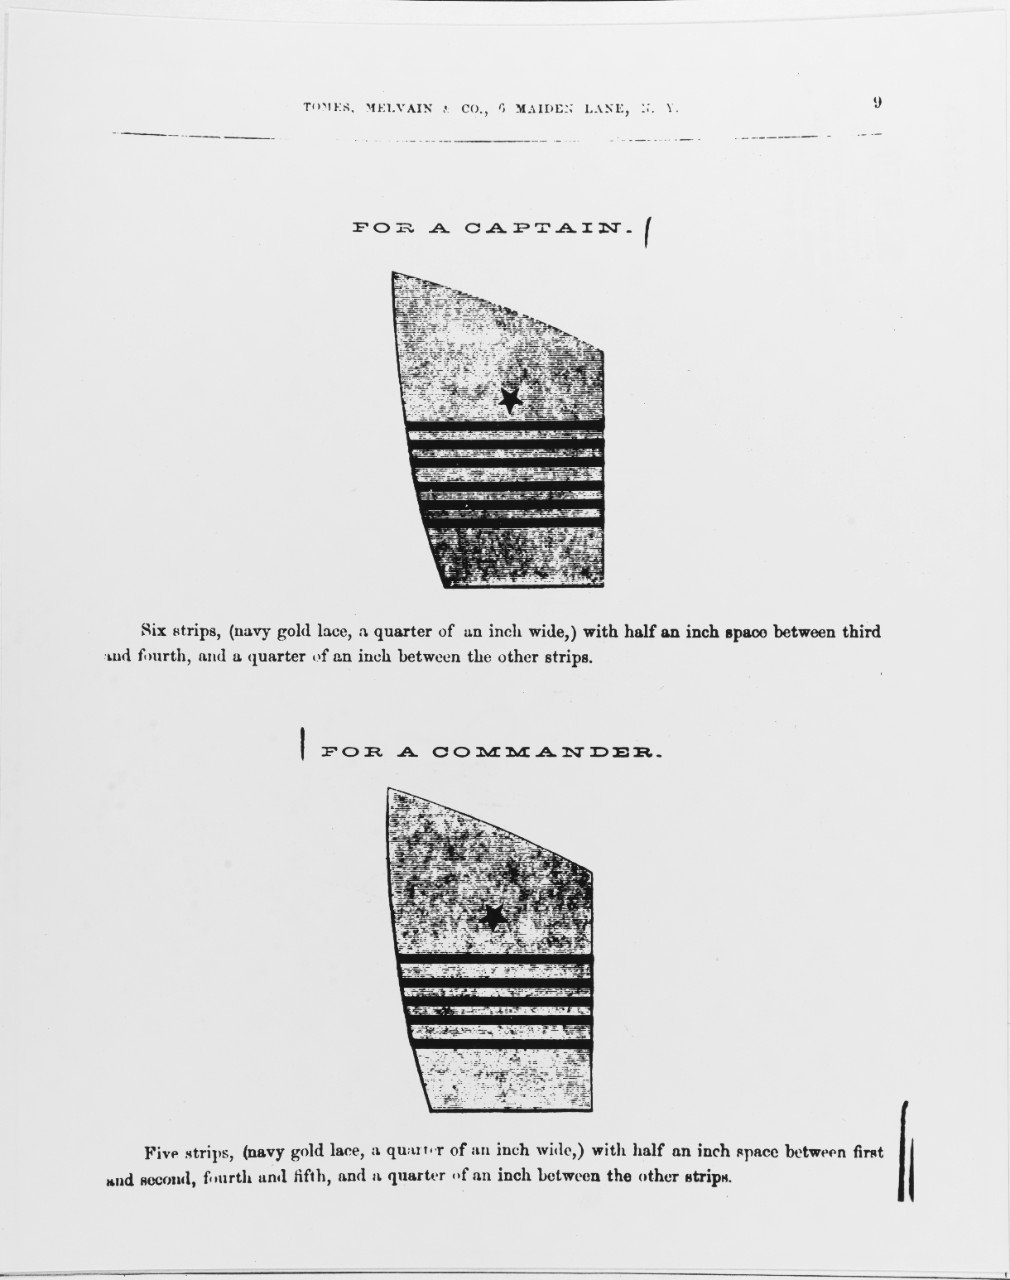 Uniform Regulations, 1864. Sleeve Insignia for a Captain and a Commander